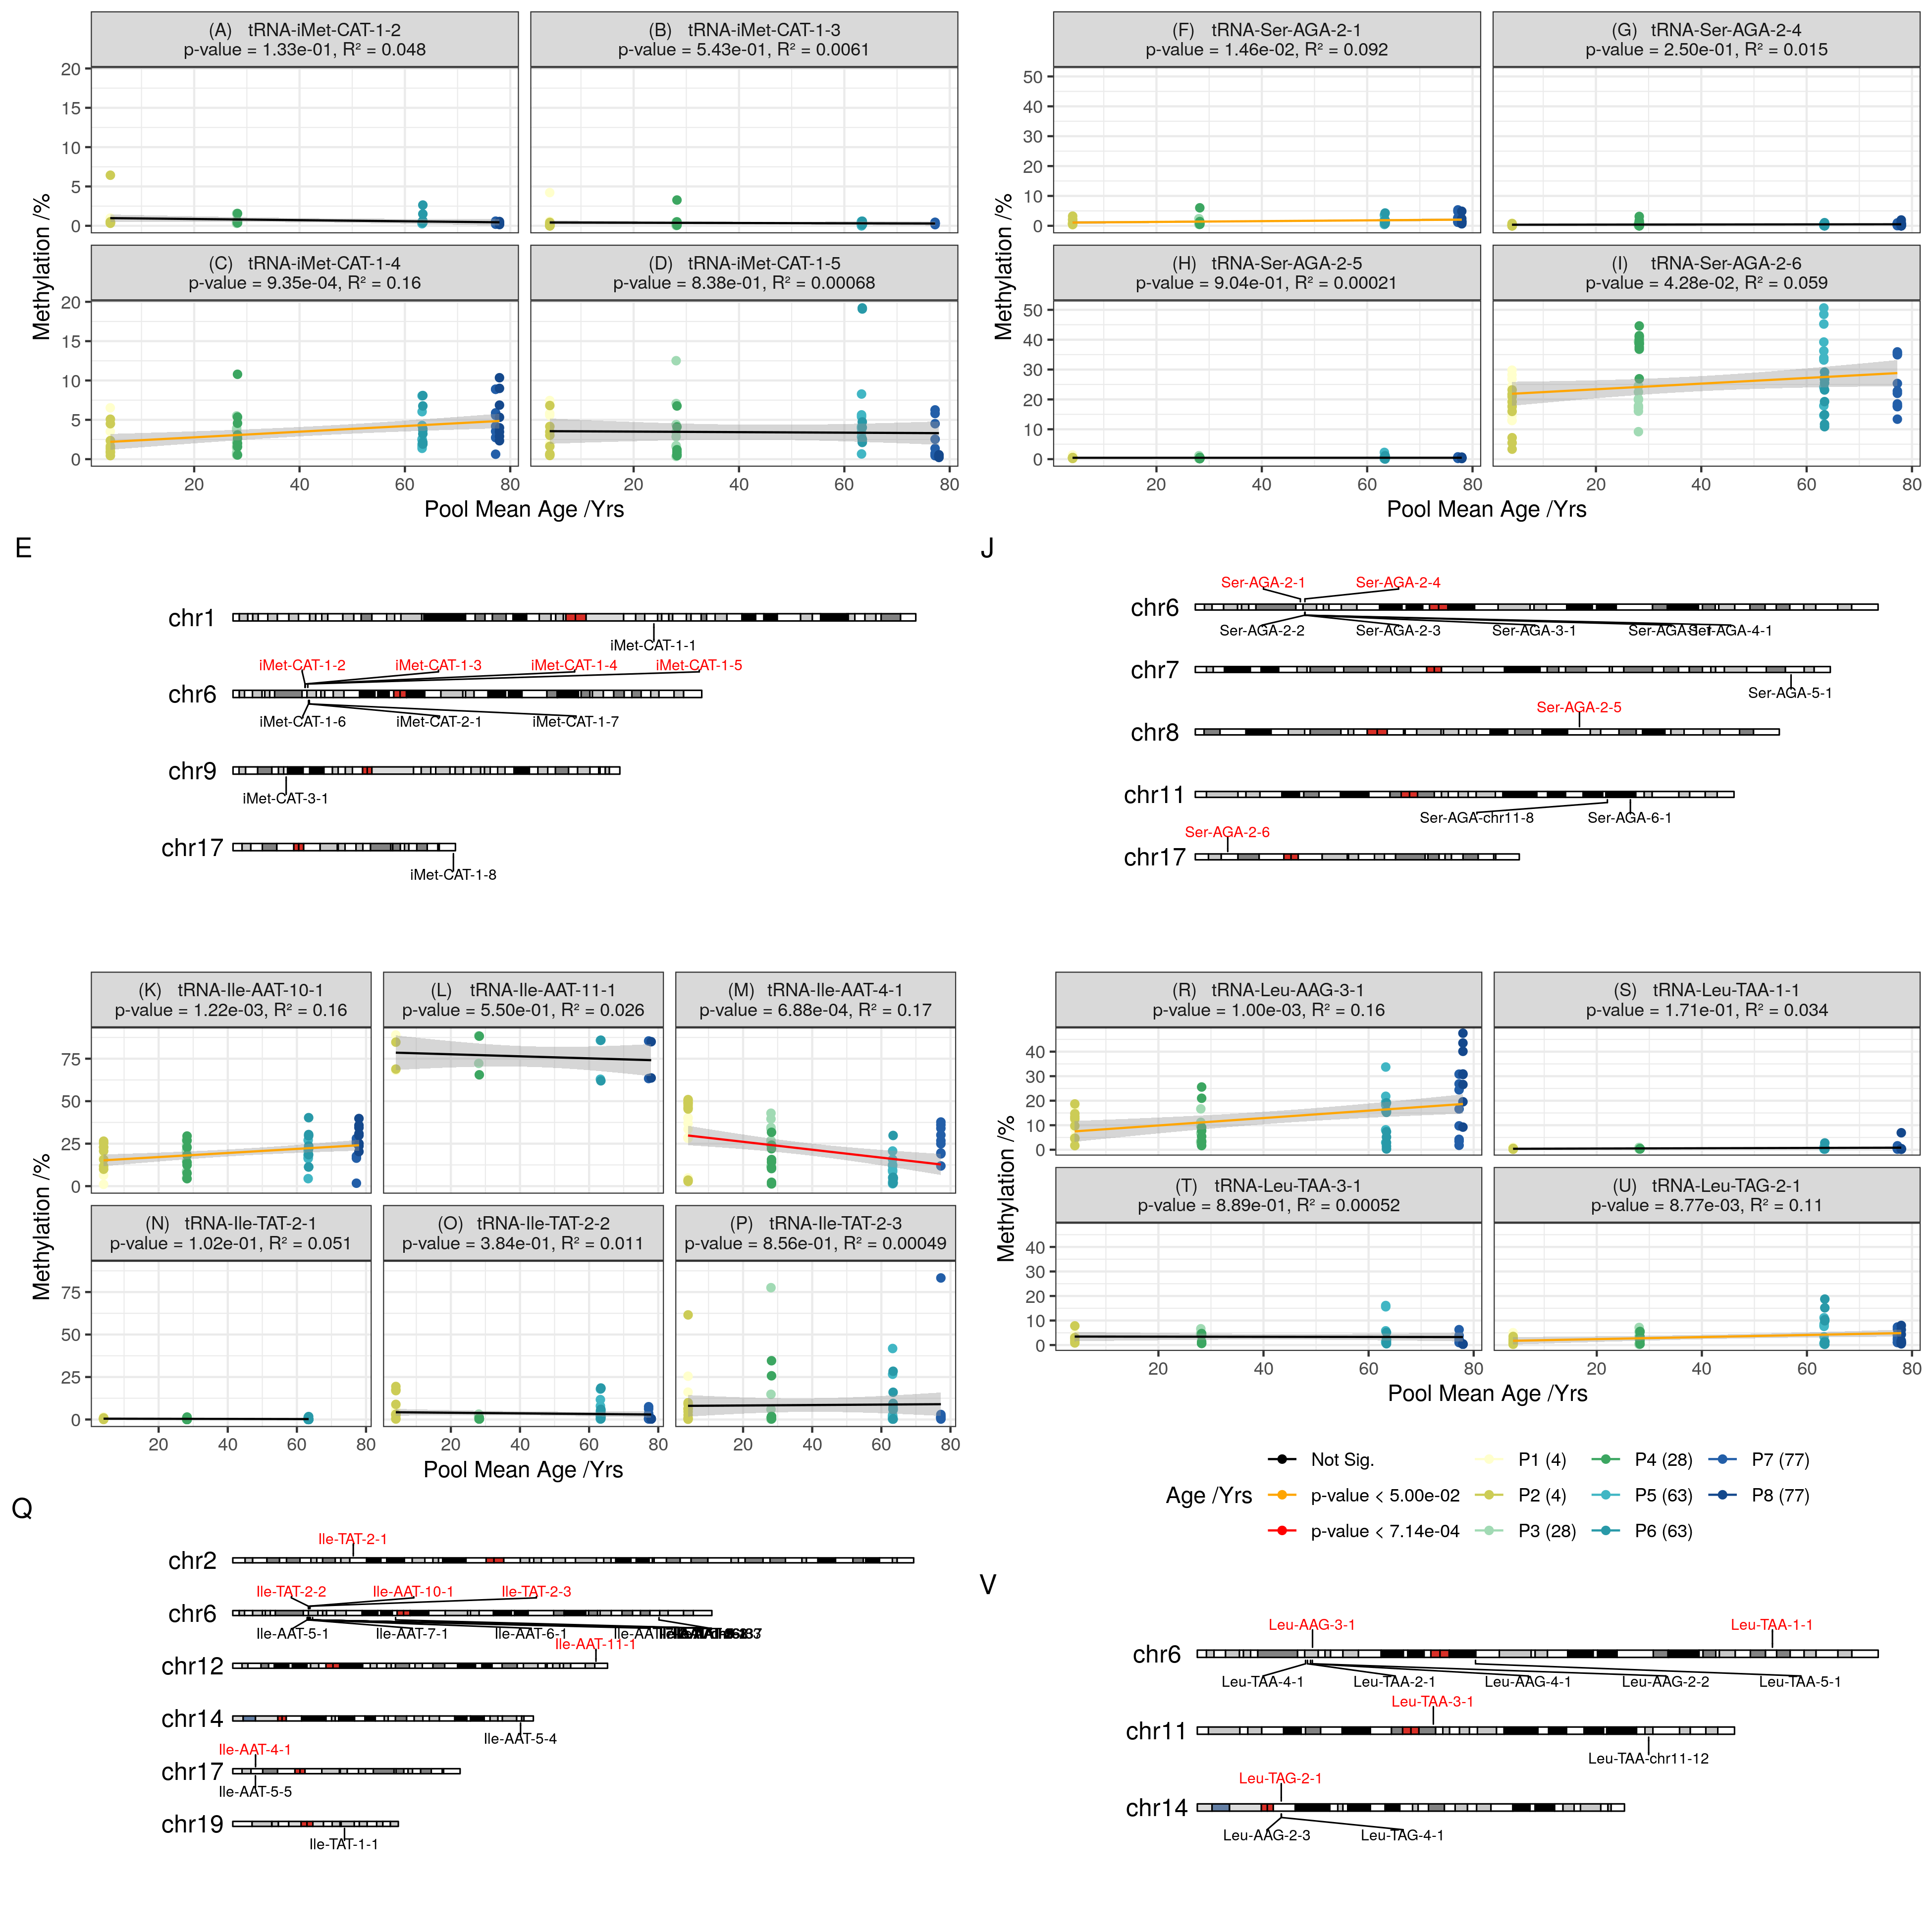 Combined CpGs within tRNA loci results (experiment-wide Bonferroni p = \(7.14 \times 10^{-4}\)); (A-D) Comparison of select tRNA-iMet-CAT loci: Hypermethylation is specific to iMet-CAT-1-4 (c) not other isodecoders (A, B, & D); (F-I) Comparison of select tRNA-Ser-AGA loci: Hypermethylation is specific to Ser-AGA-2-6 A (viii) and to a lesser extent Ser-AGA-2-1 (F), whilst not other isodecoders (G, H); (K-P) Comparison of select tRNA-Ile loci: Hypermethylation is specific to Ile-AAT-10-1 (K), Ile-AAT-4-1 (M) displays hypomethylation contrary to previous MeDIP findings, Ile-TAT-2-2 & 2-3 lack hypermethylation (previously non-significant in blood-corrected MeDIP, although significant in uncorrected), whilst no change in Ile-AAT-11-1 (L) and Ile-TAT-2-1 (N); (R-U) Comparison of select tRNA-Leu loci: Hypermethylation in Leu-AAG-3-1 (R) consistent with 450k and Leu-TAG-2-1 (U) consistent with MeDIP, whilst no change in Leu-TAA-1-1 (S) & Leu-TAA-3-1 (T).